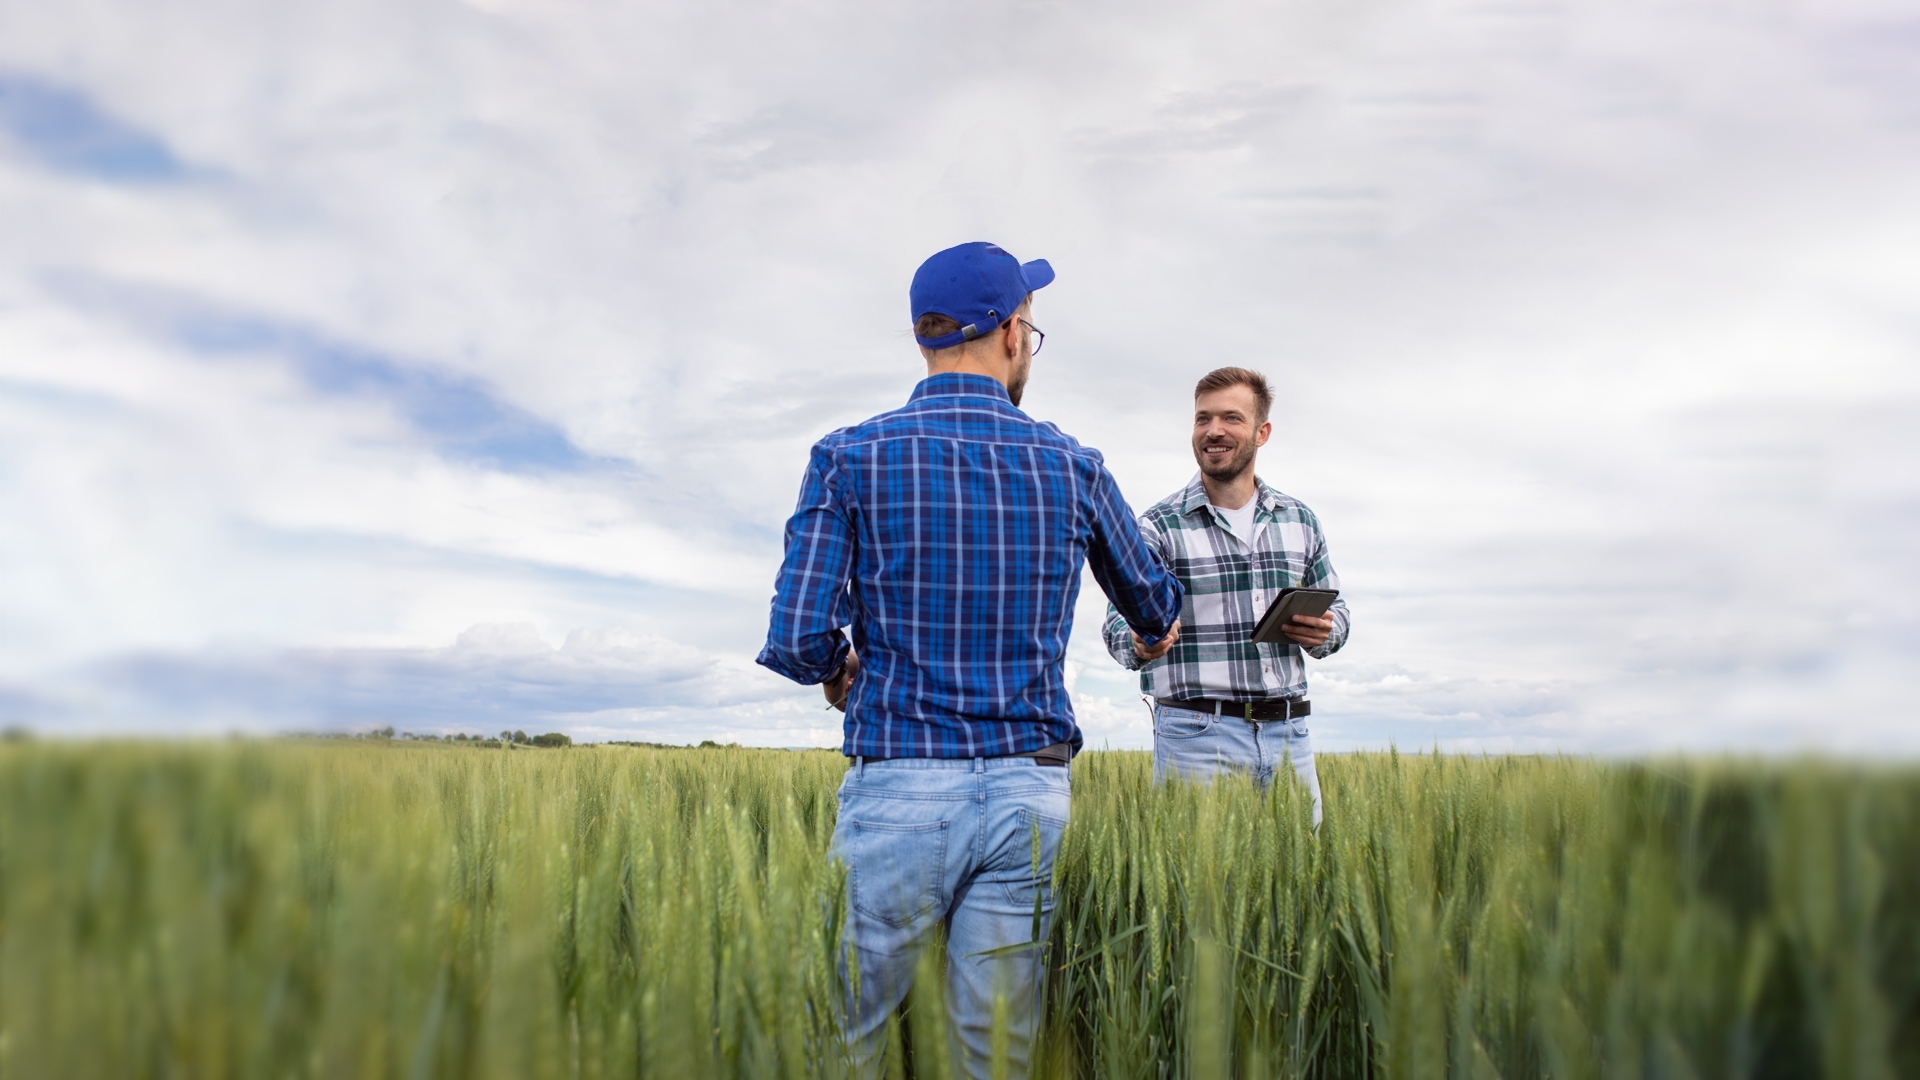 Farmer shaking hands with another farmer in the middle of a wheat field